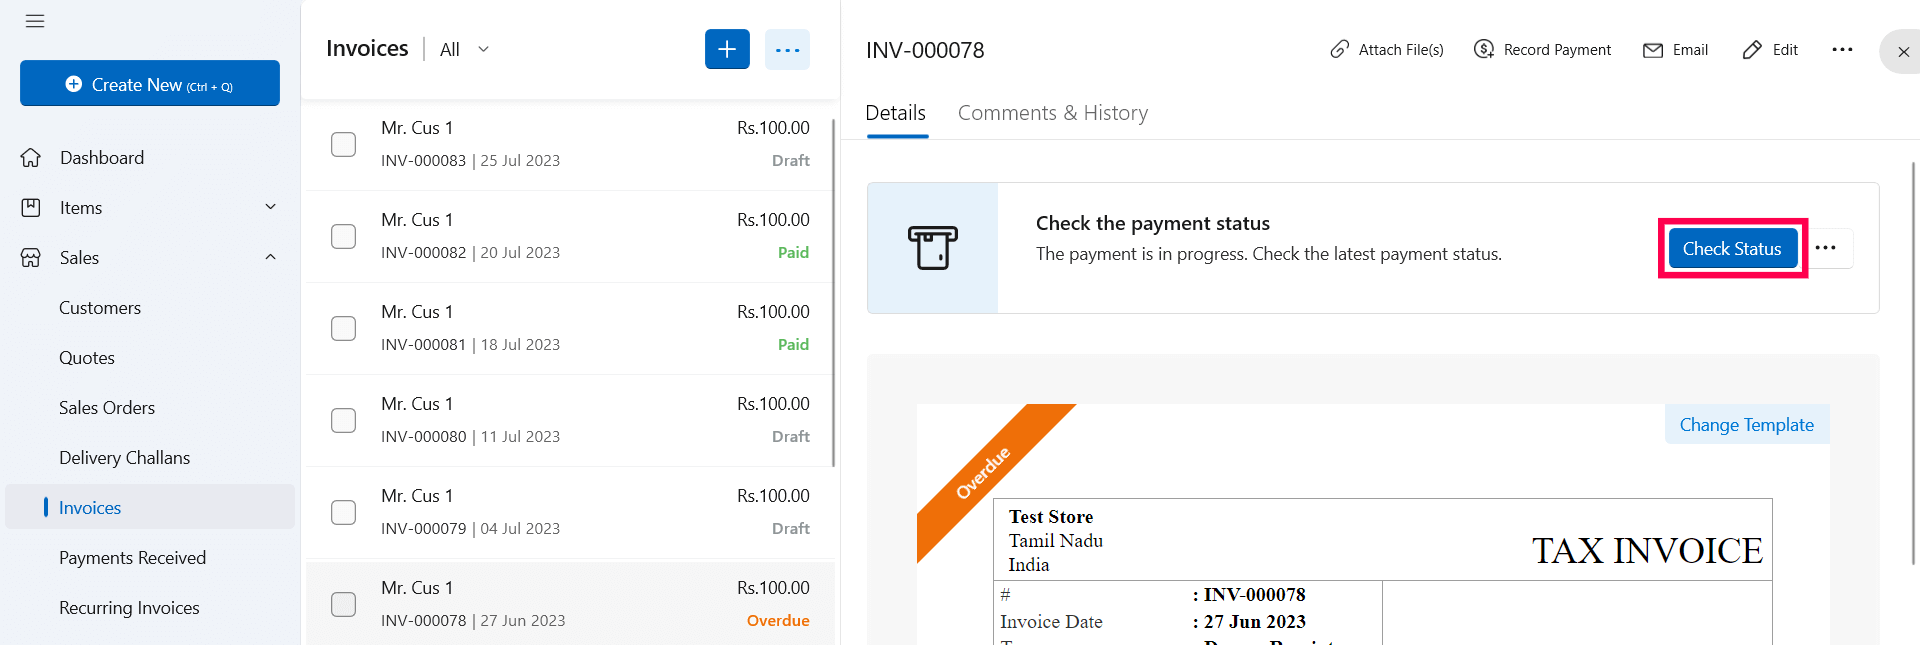 Check Payment Status